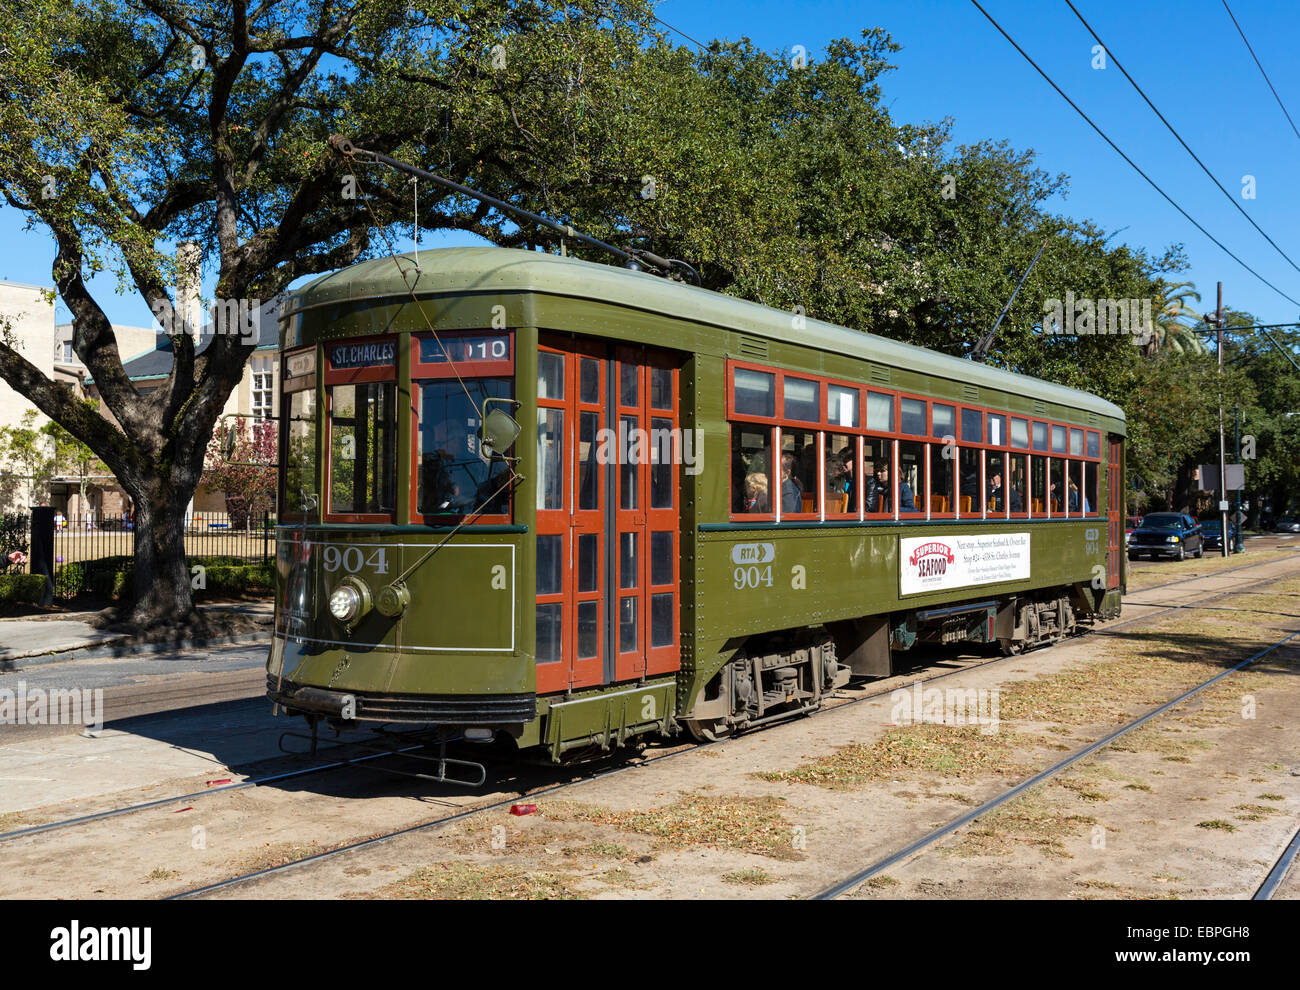 St. Charles Streetcar auf St. Charles Avenue in uptown New Orleans, Louisiana, USA Stockfoto